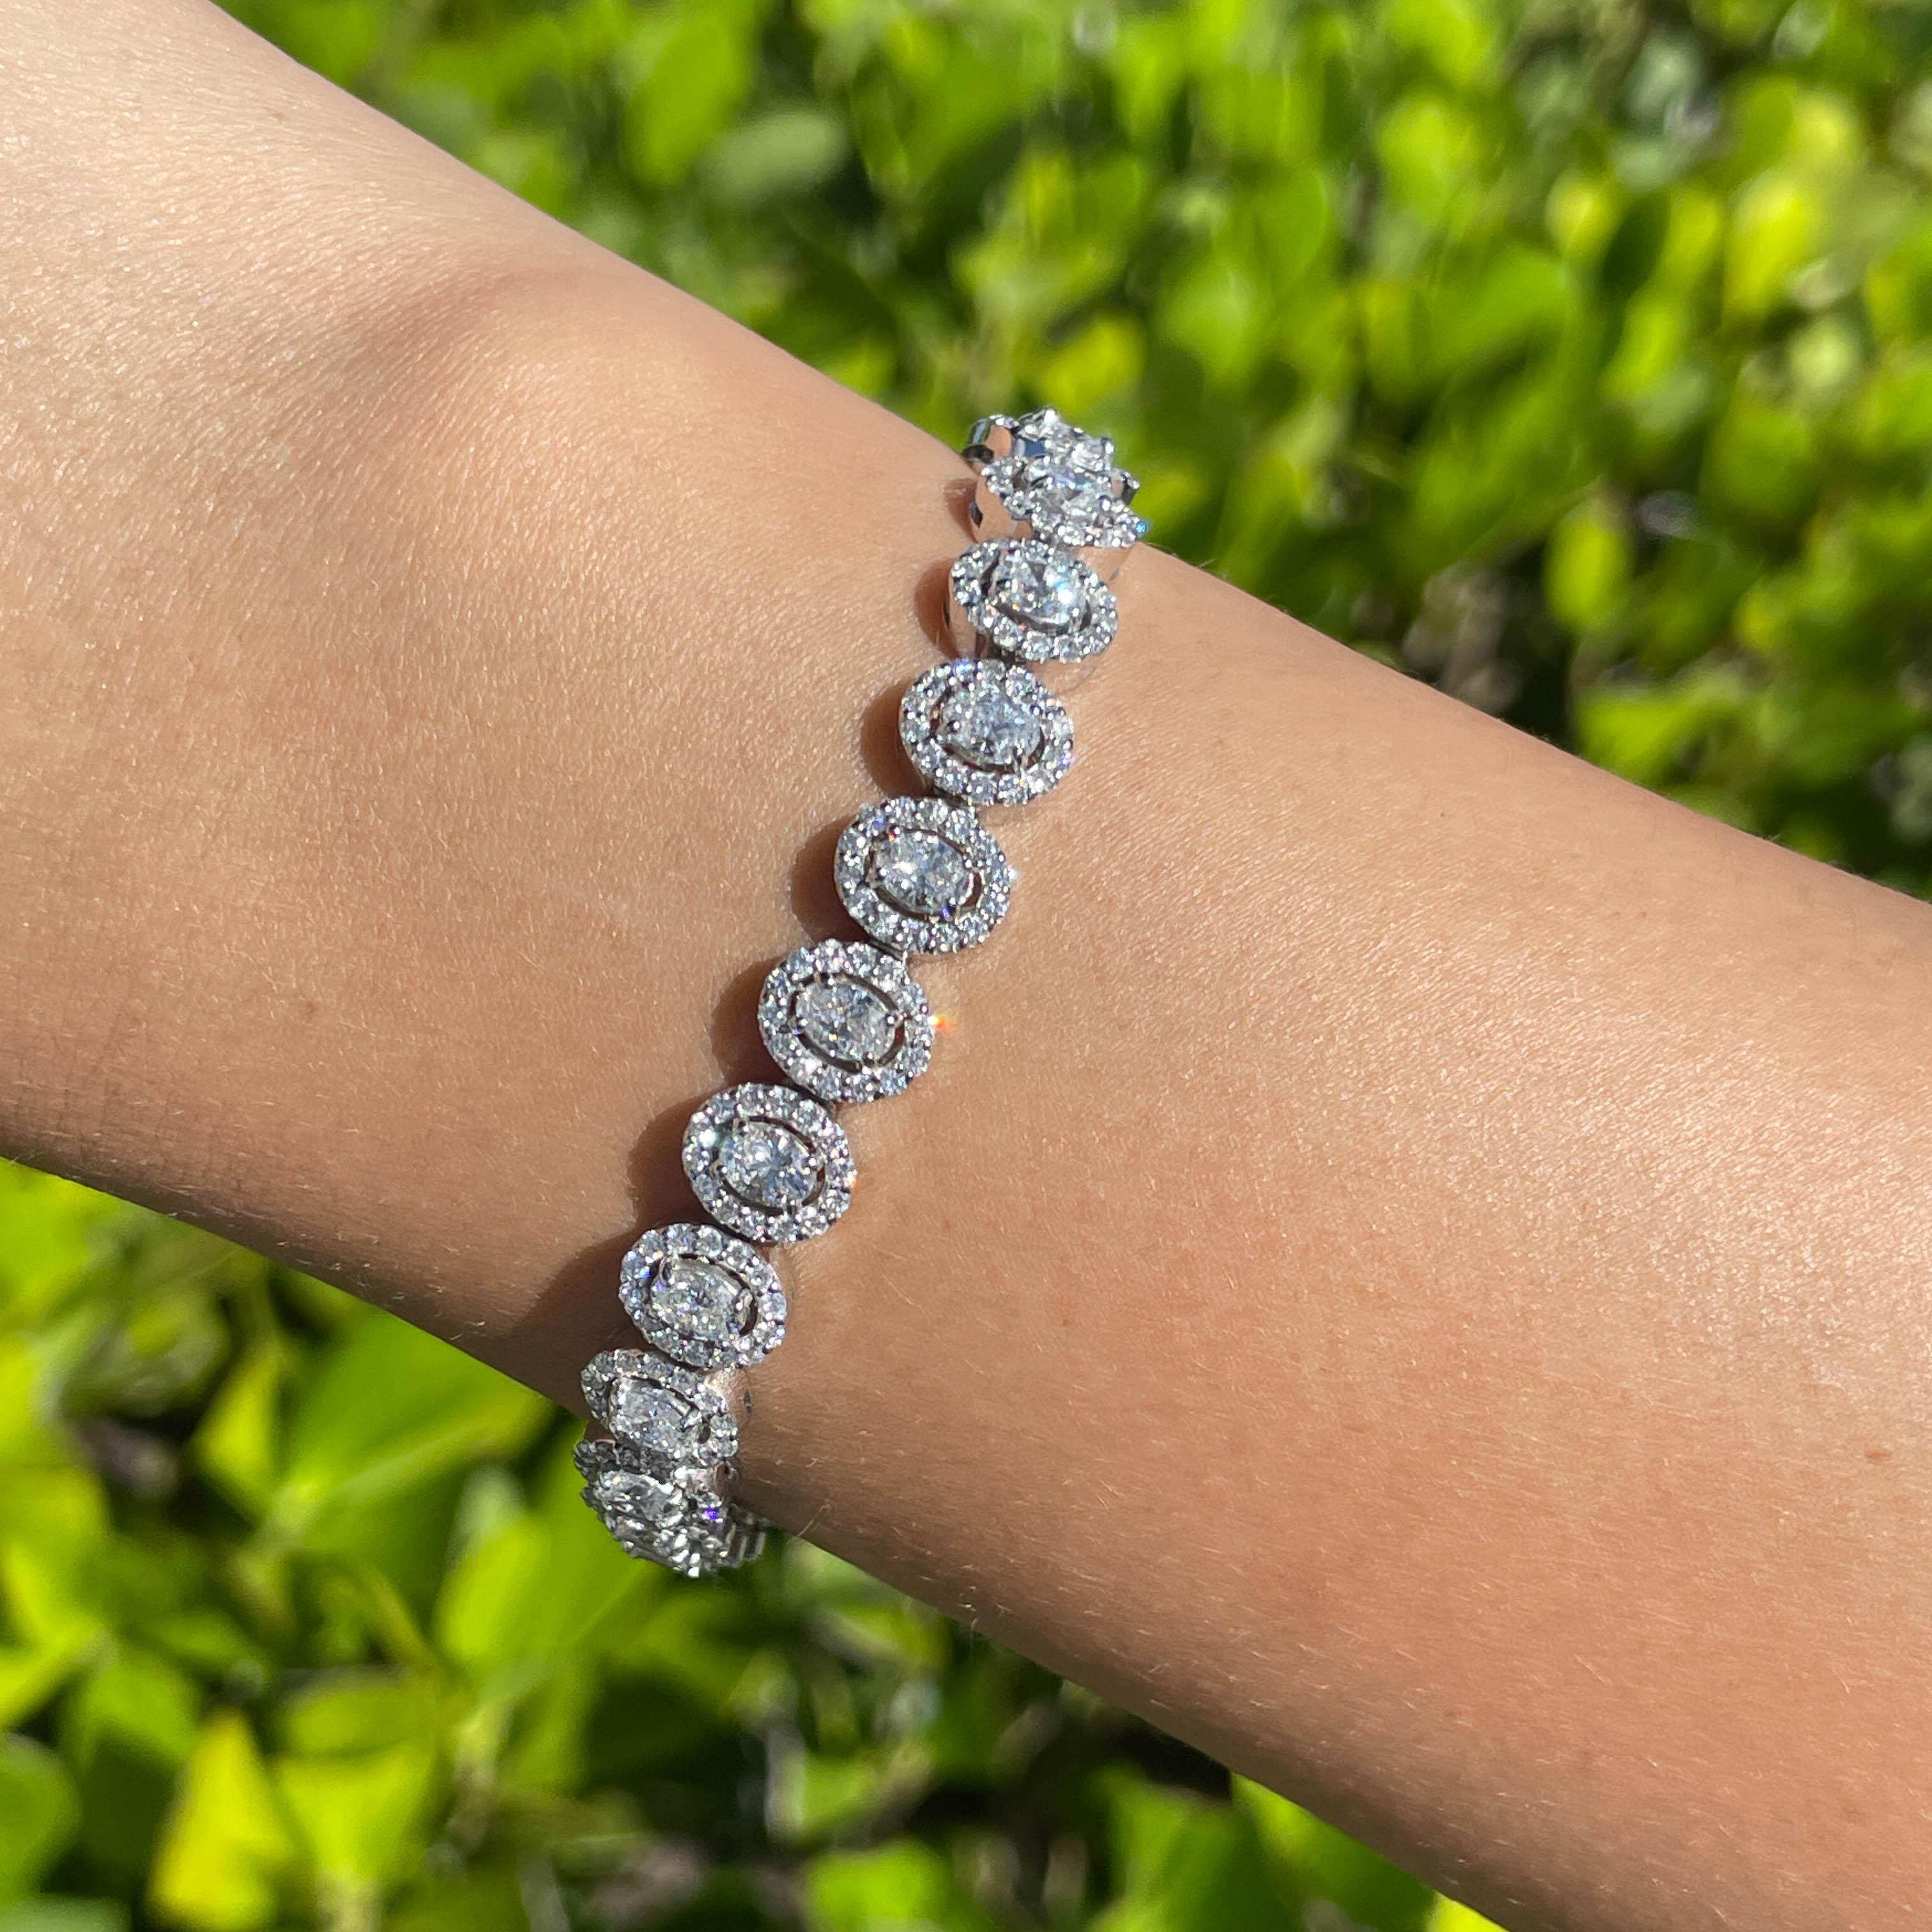 Jay Feder 14k White Gold Diamond Oval Halo Tennis Bracelet

Set with 24 ovals and 336 round brilliant diamonds; total carat weight is 7.25ctw. 

The bracelet is 7 inches long and 8.21mm wide. Total weight is 20.8 grams. 

Please view our photos and